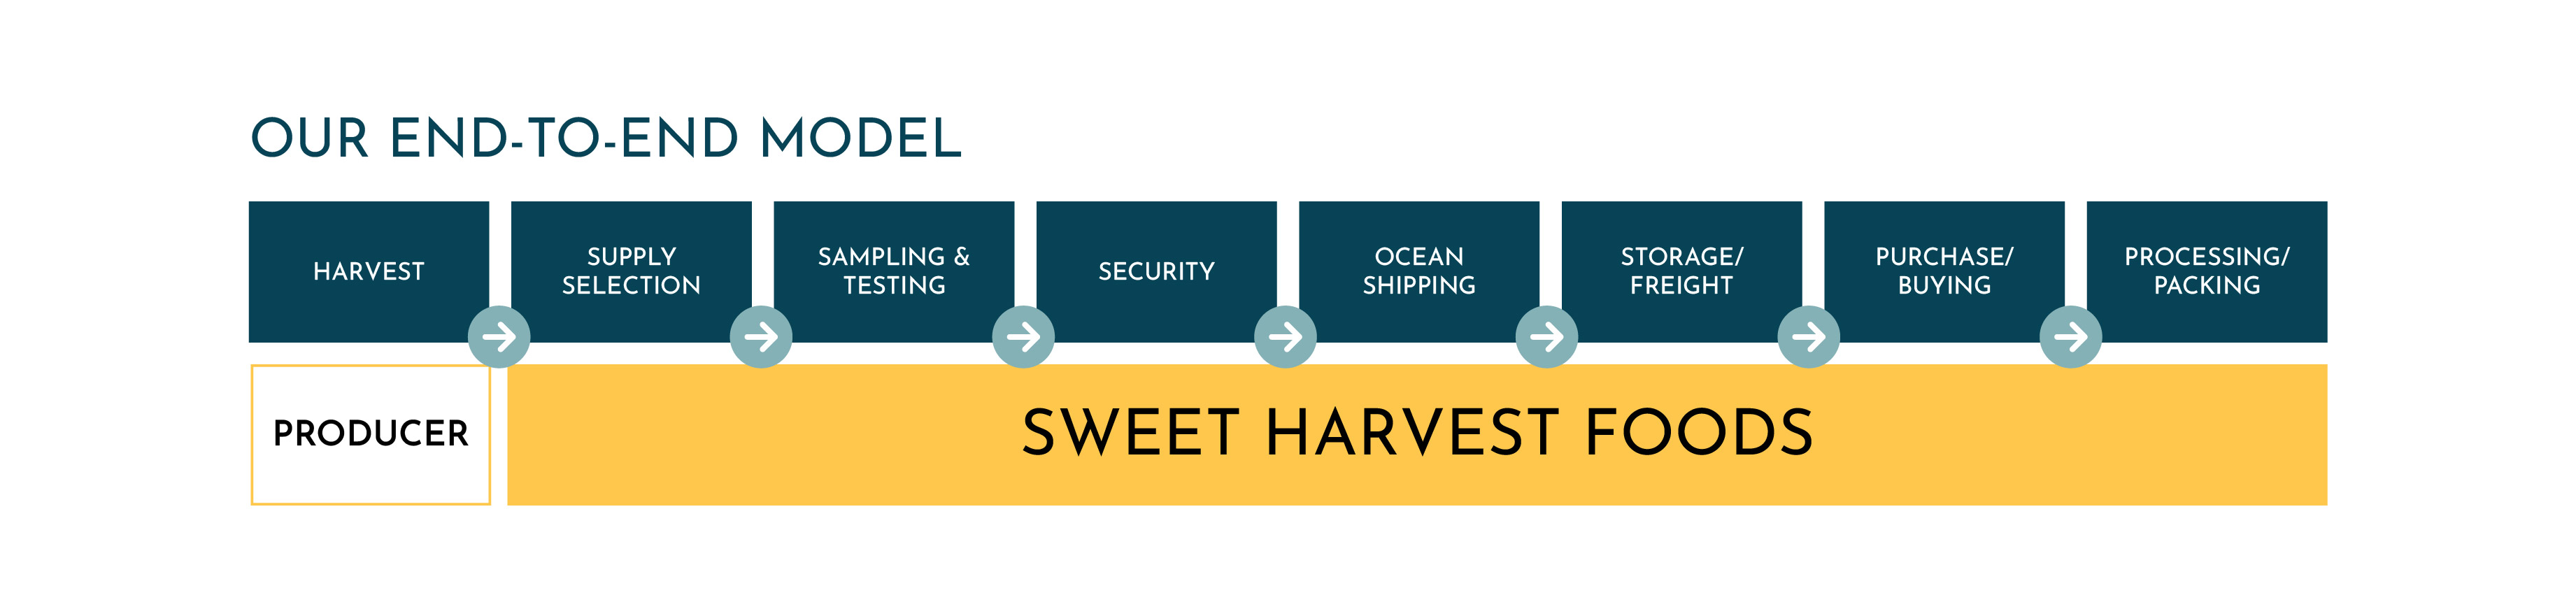 The image shows a flowchart of Sweet Harvest Foods production process, from HARVEST to PACKING.